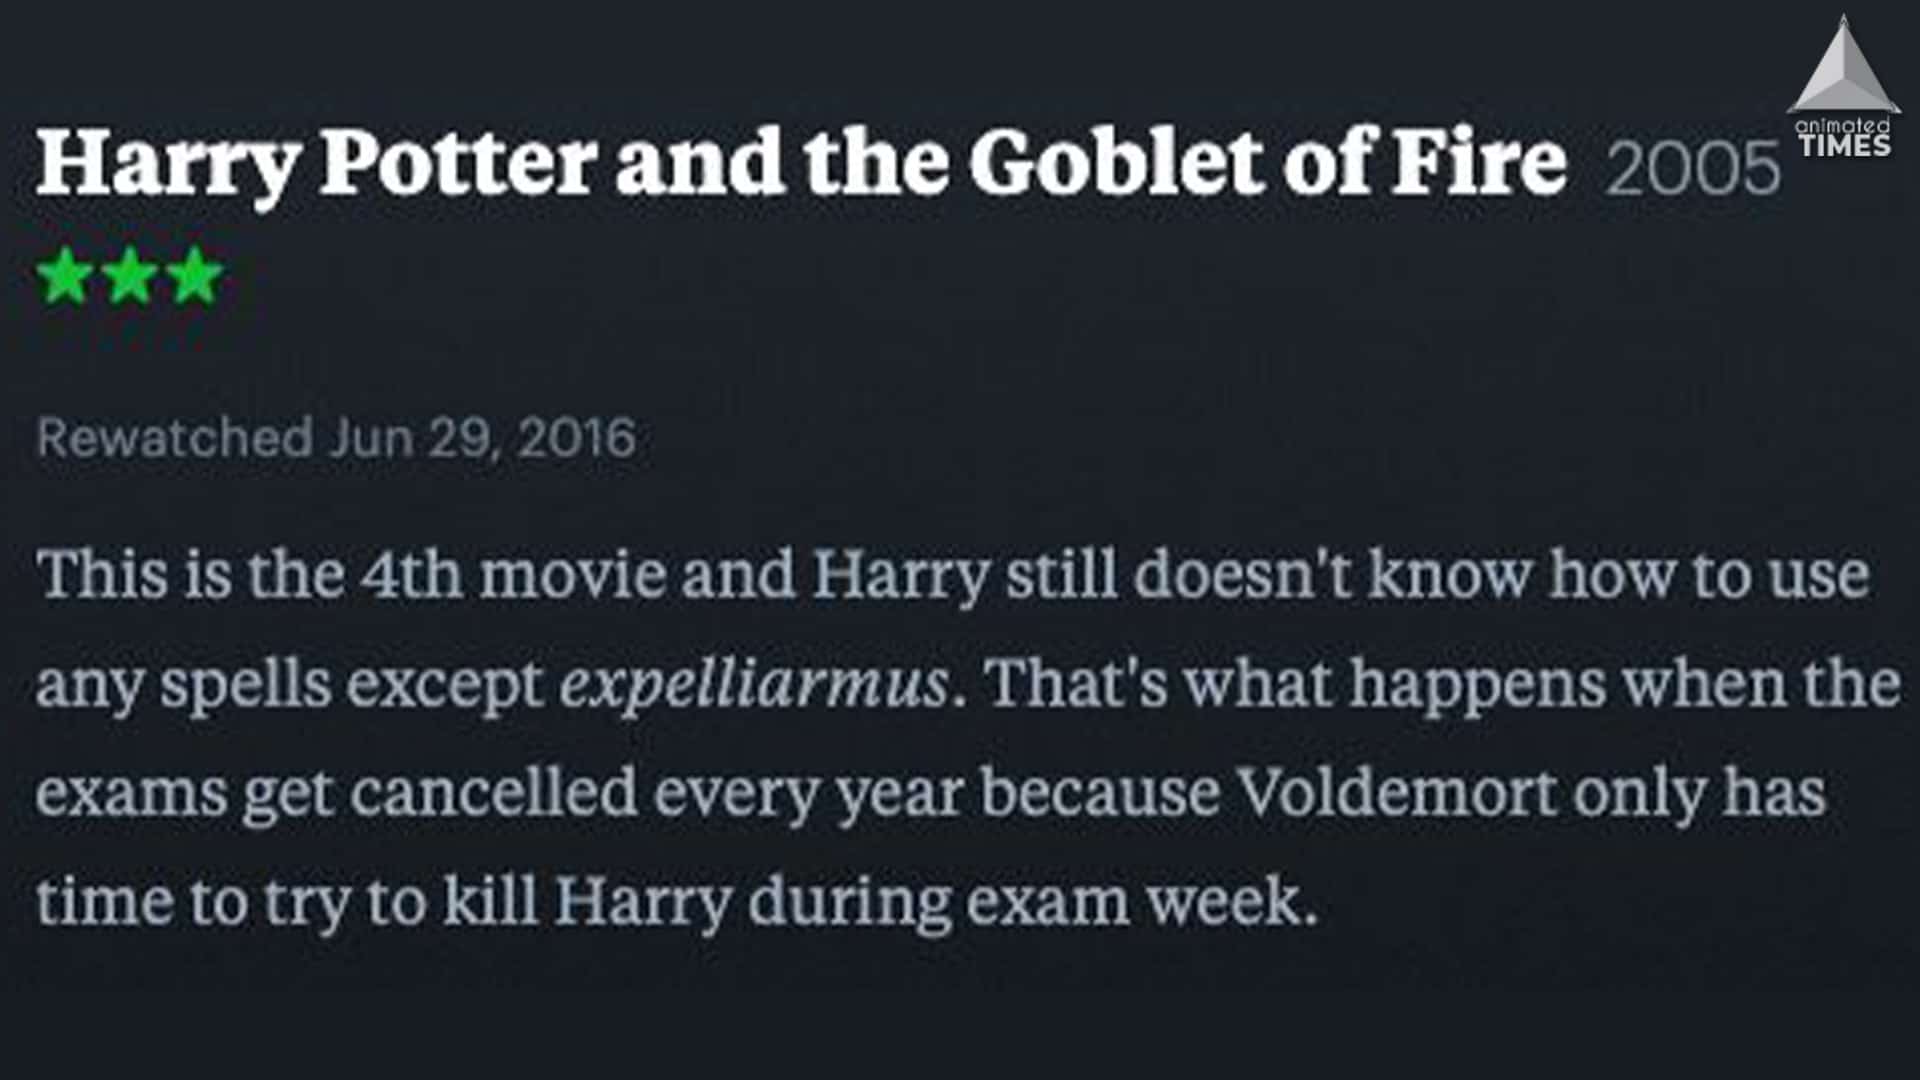 25 Hilarious Letterboxd Reviews Of Harry Potter Movies To Crack You Up!